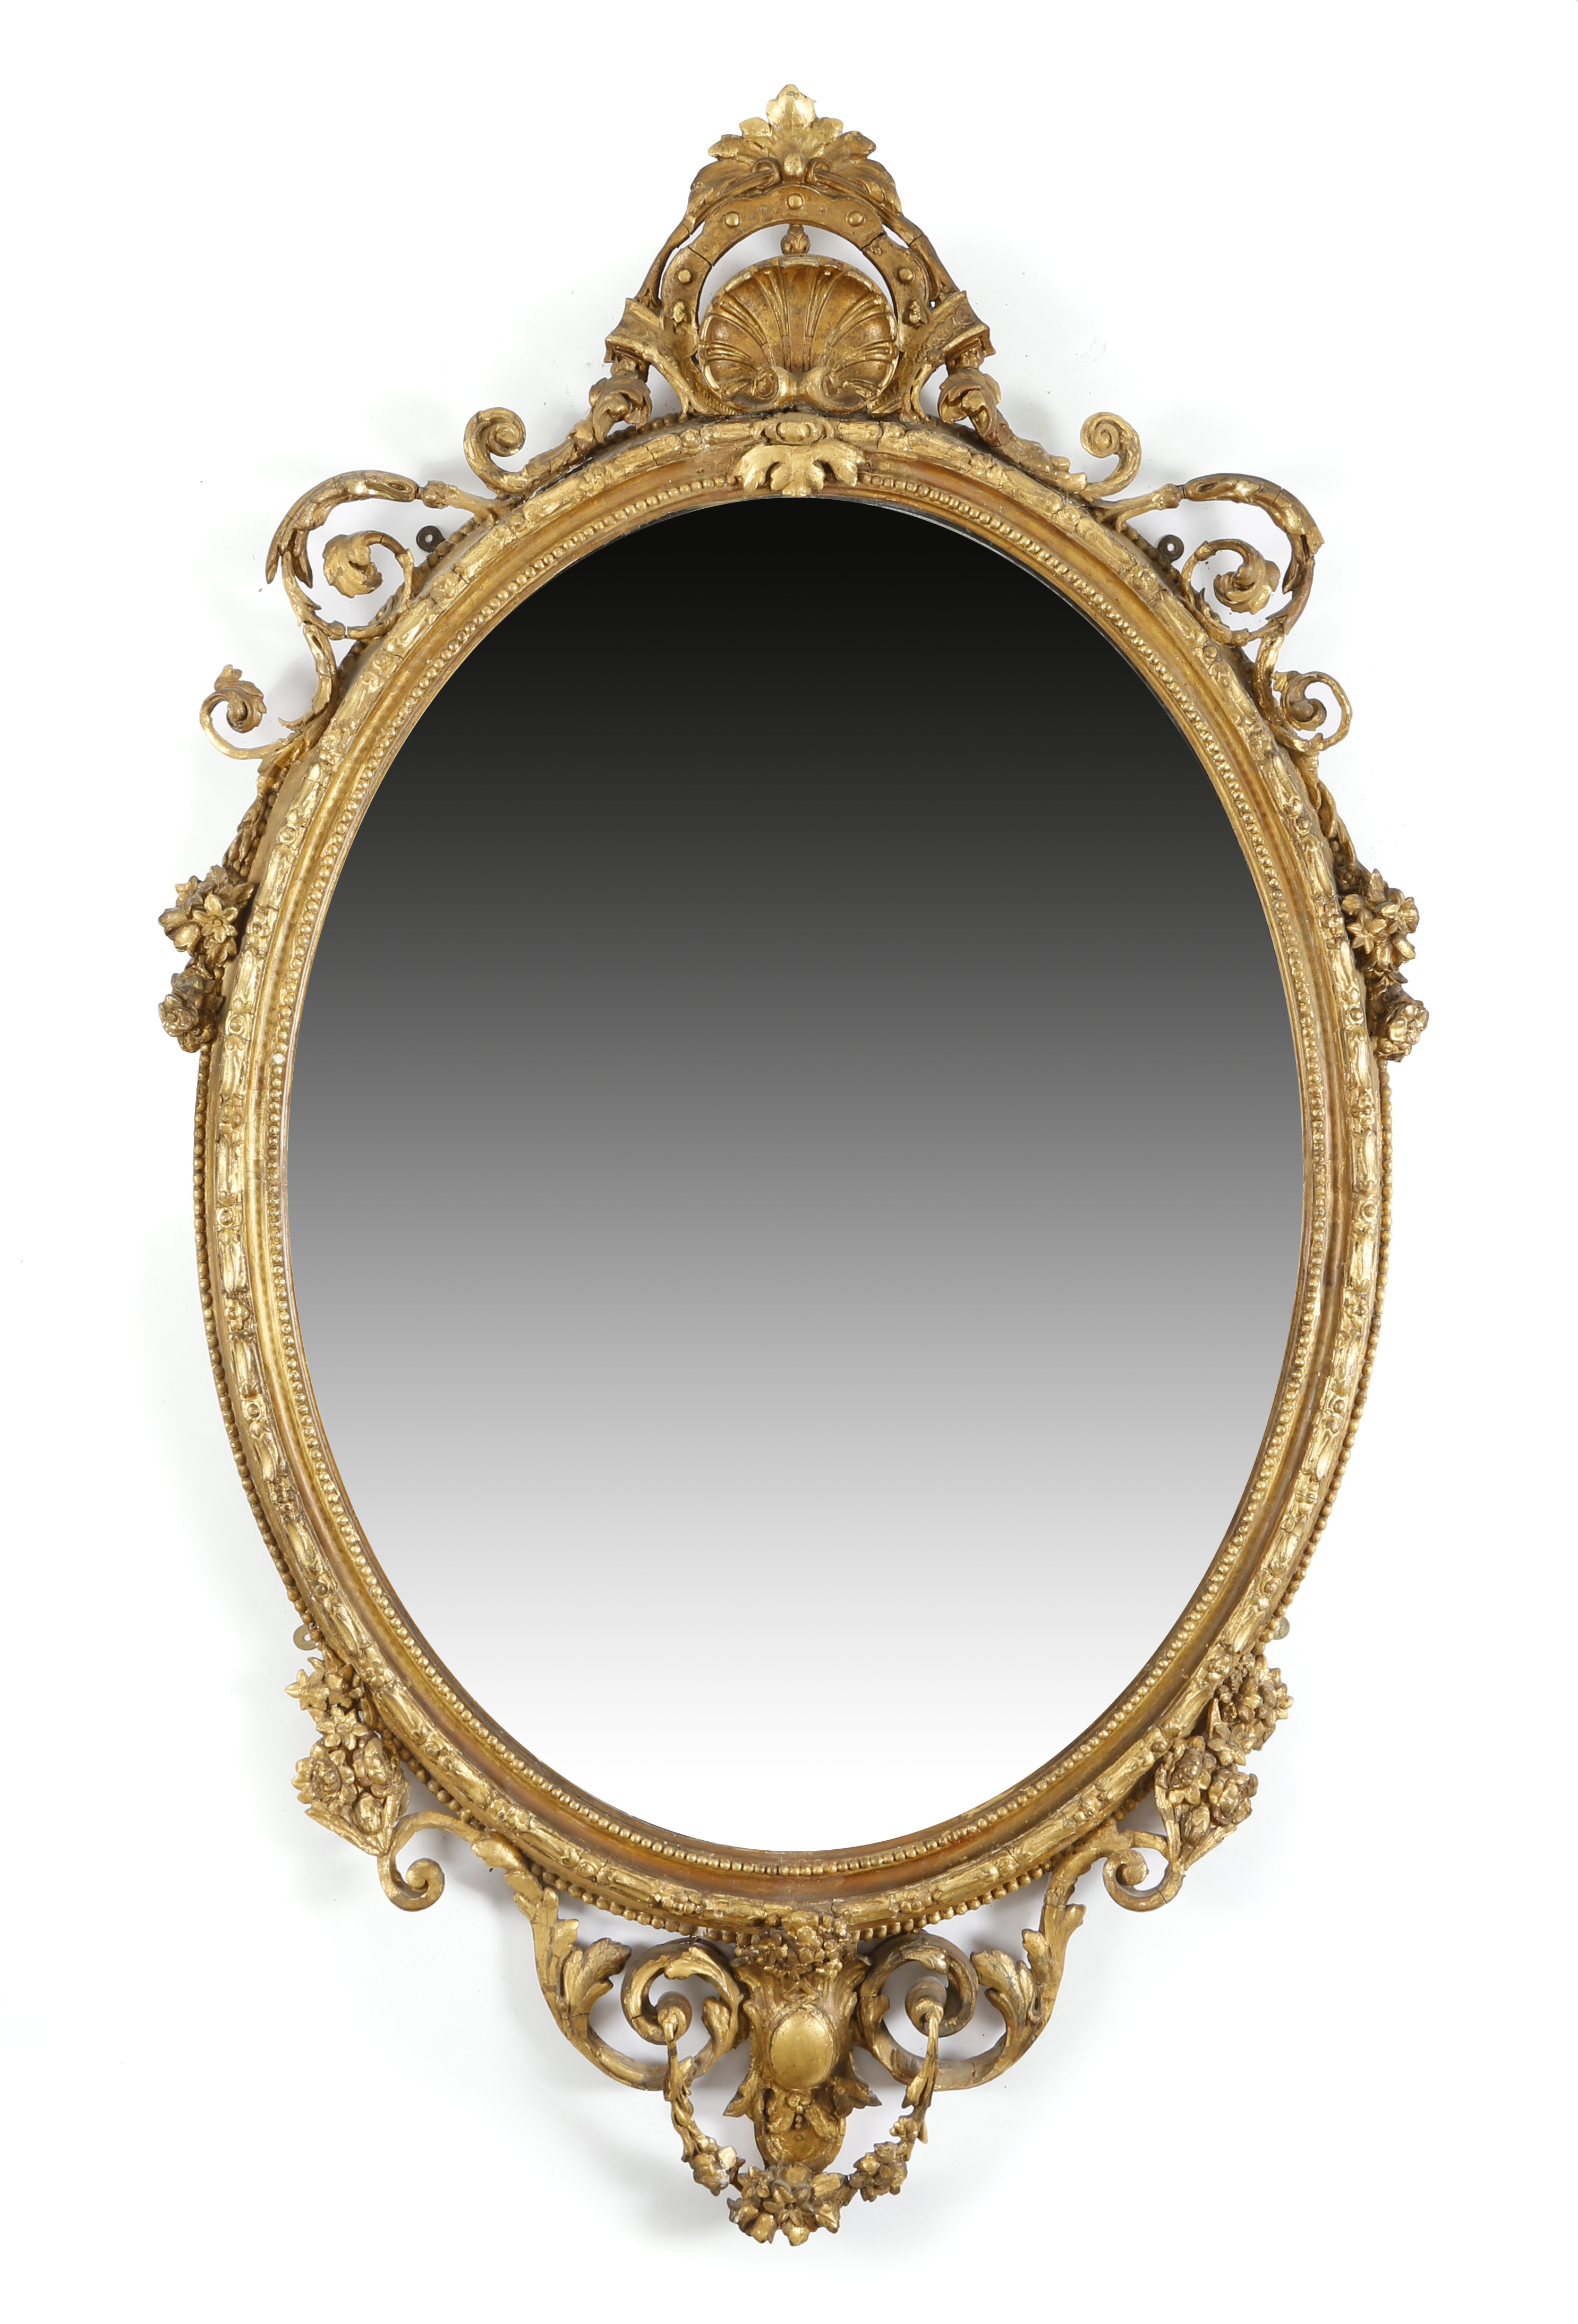 A VICTORIAN GILTWOOD AND GESSO WALL MIRROR C.1860 the oval plate within a beaded inner frame, with a